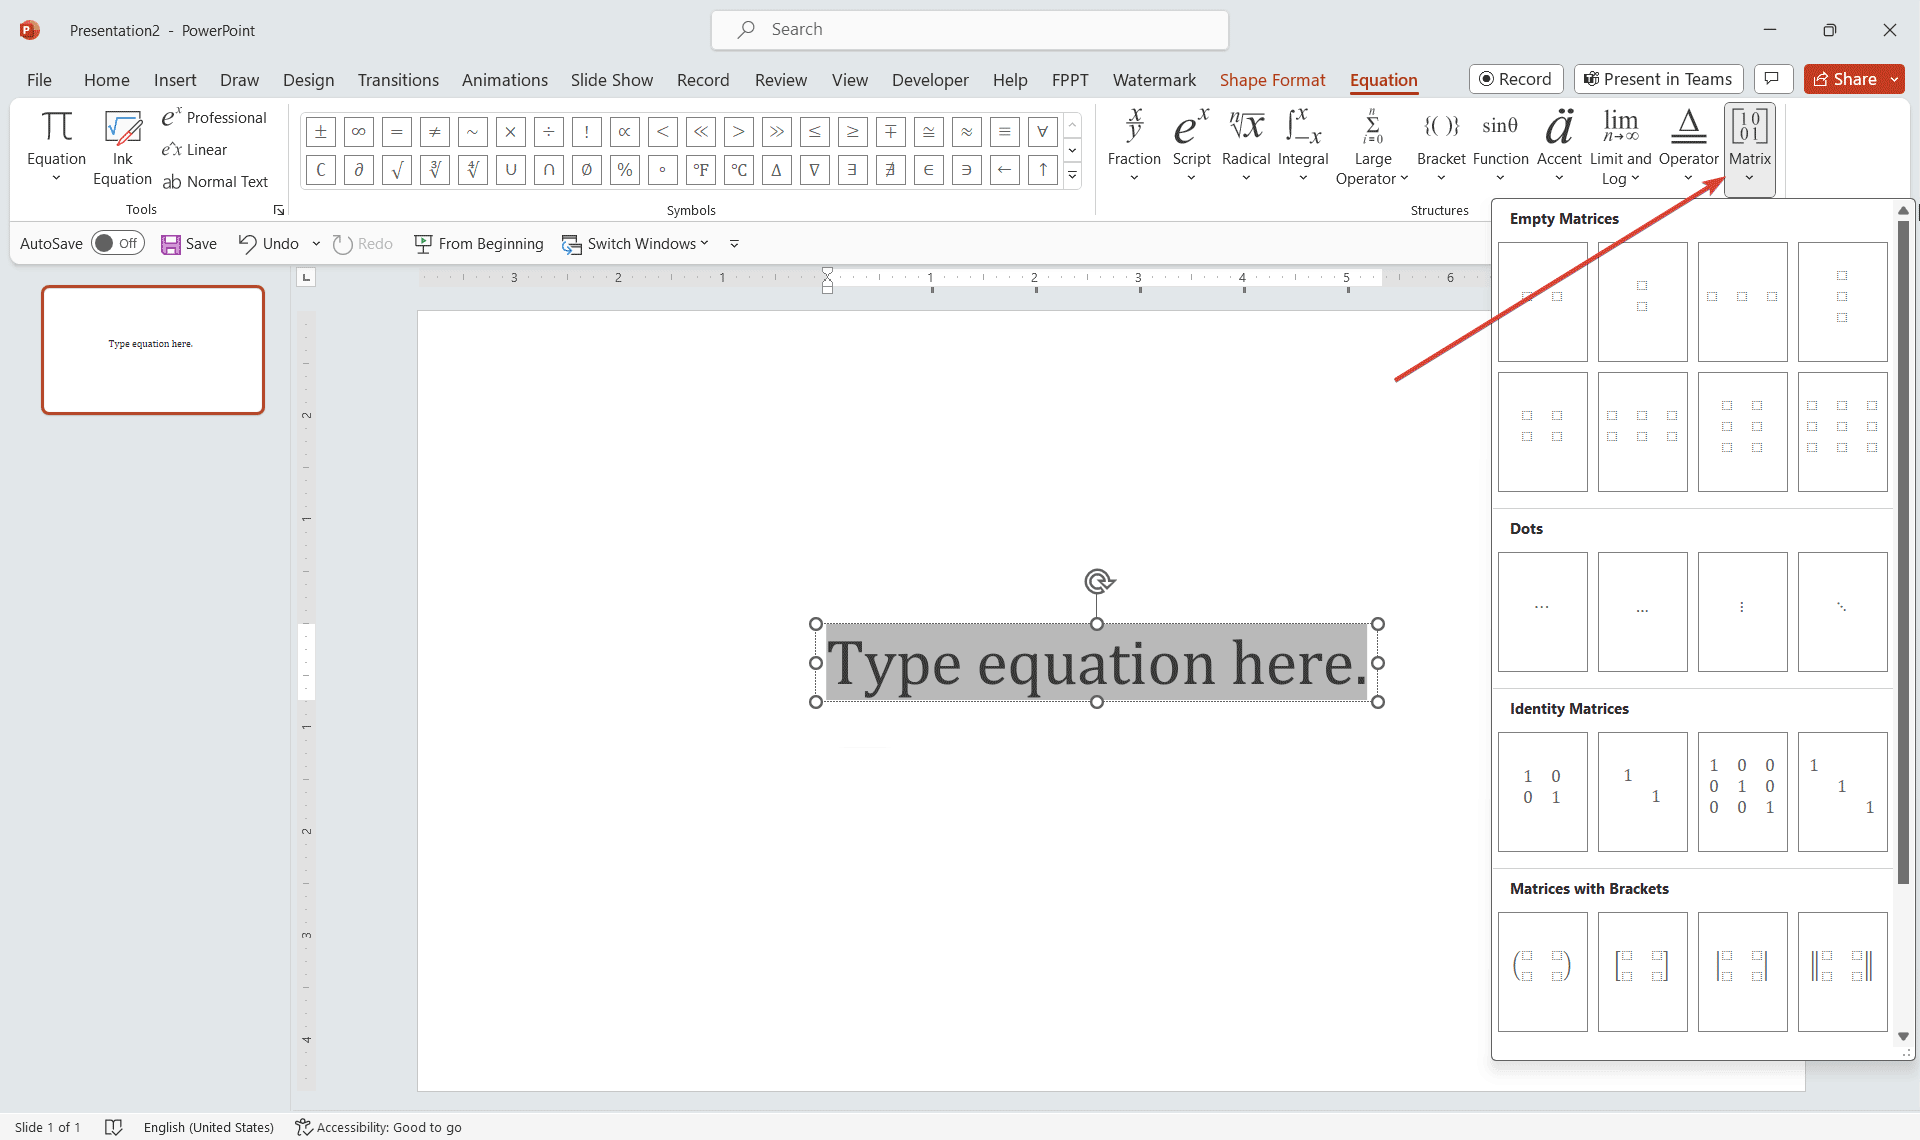 How to Insert a Matrix in PowerPoint using the PowerPoint Equation Editor